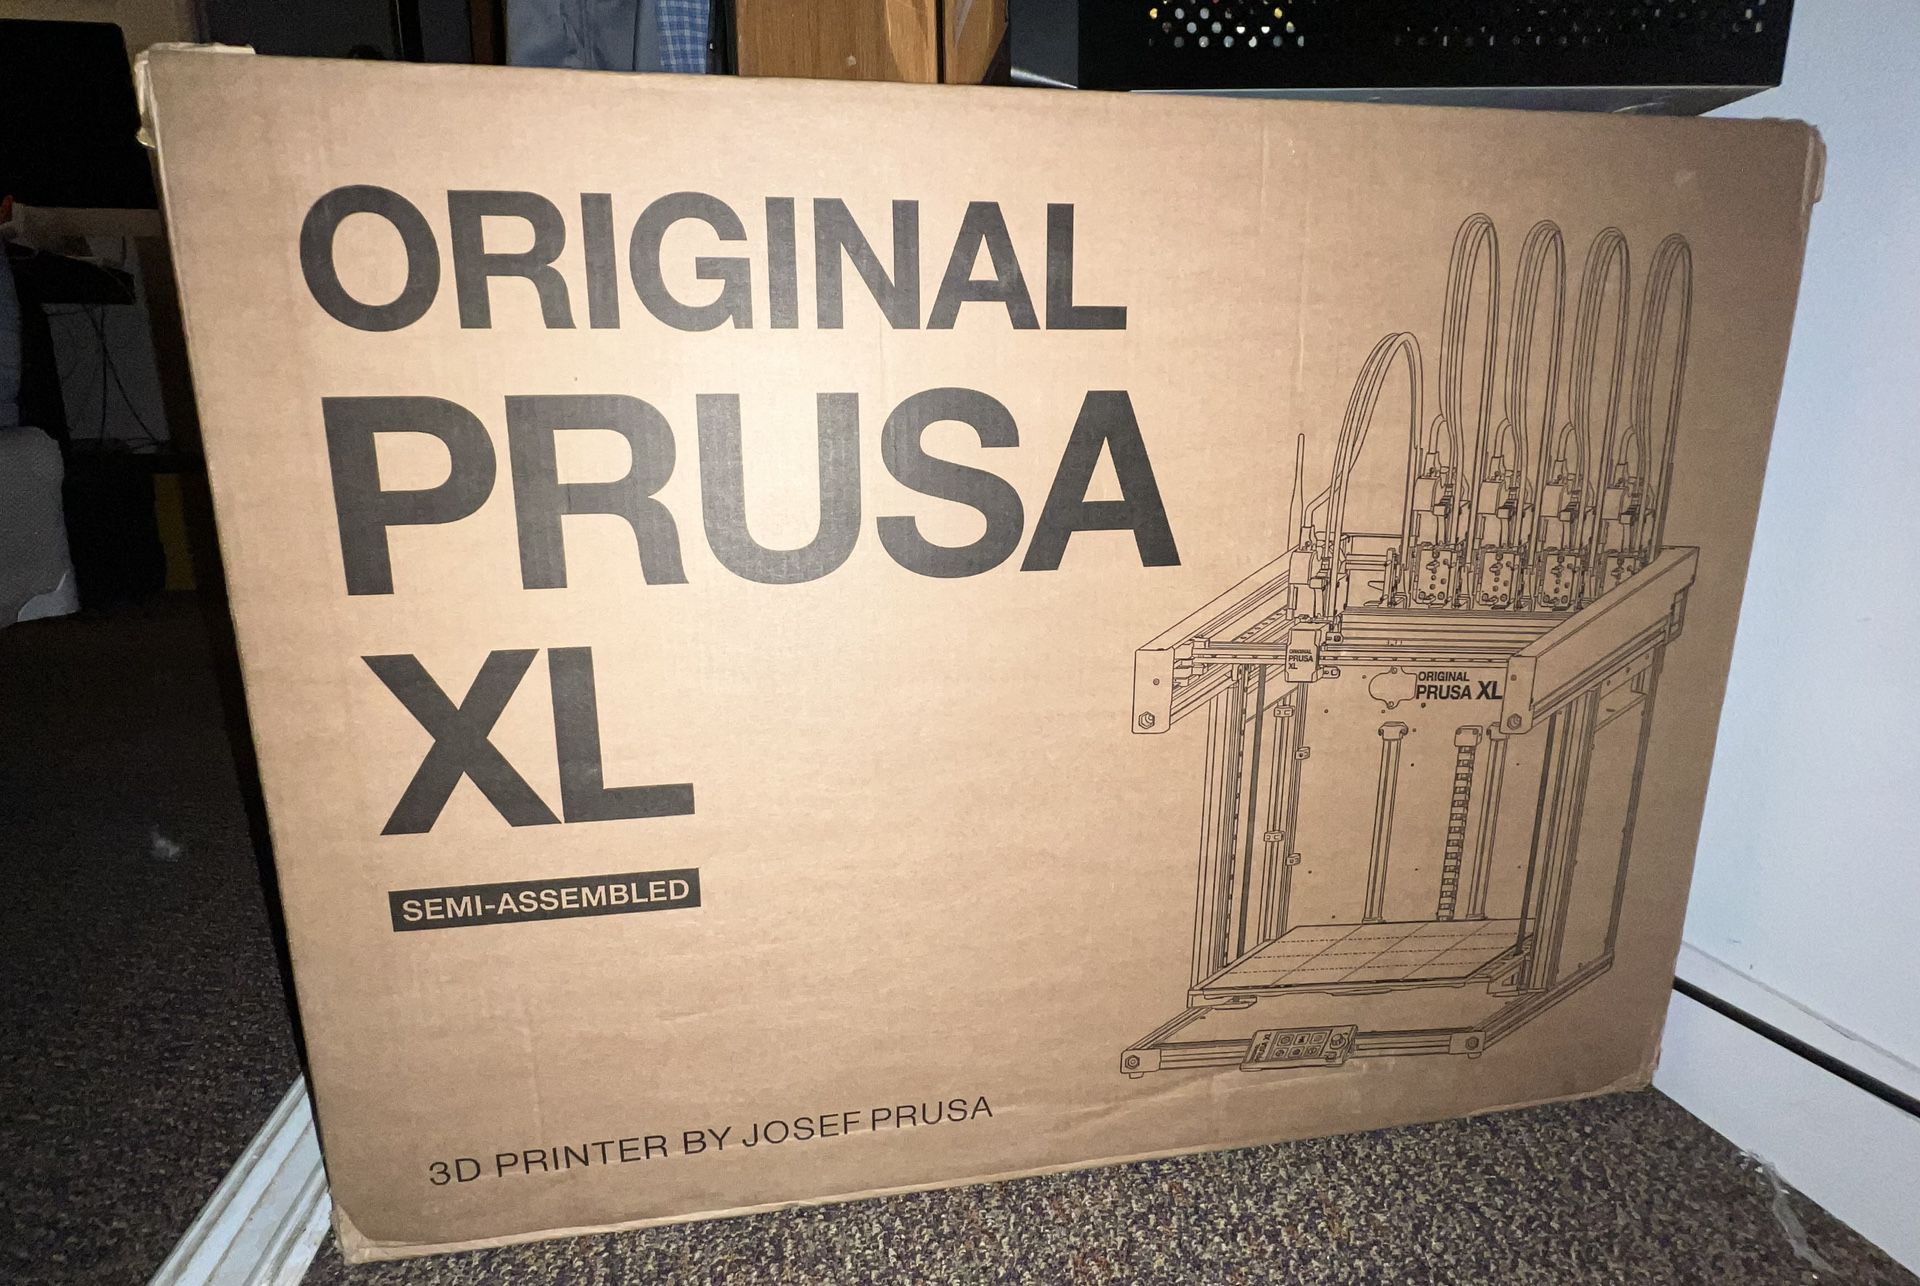 3D printer Brand New Prusa XL Pre Assembled for Sale in Los